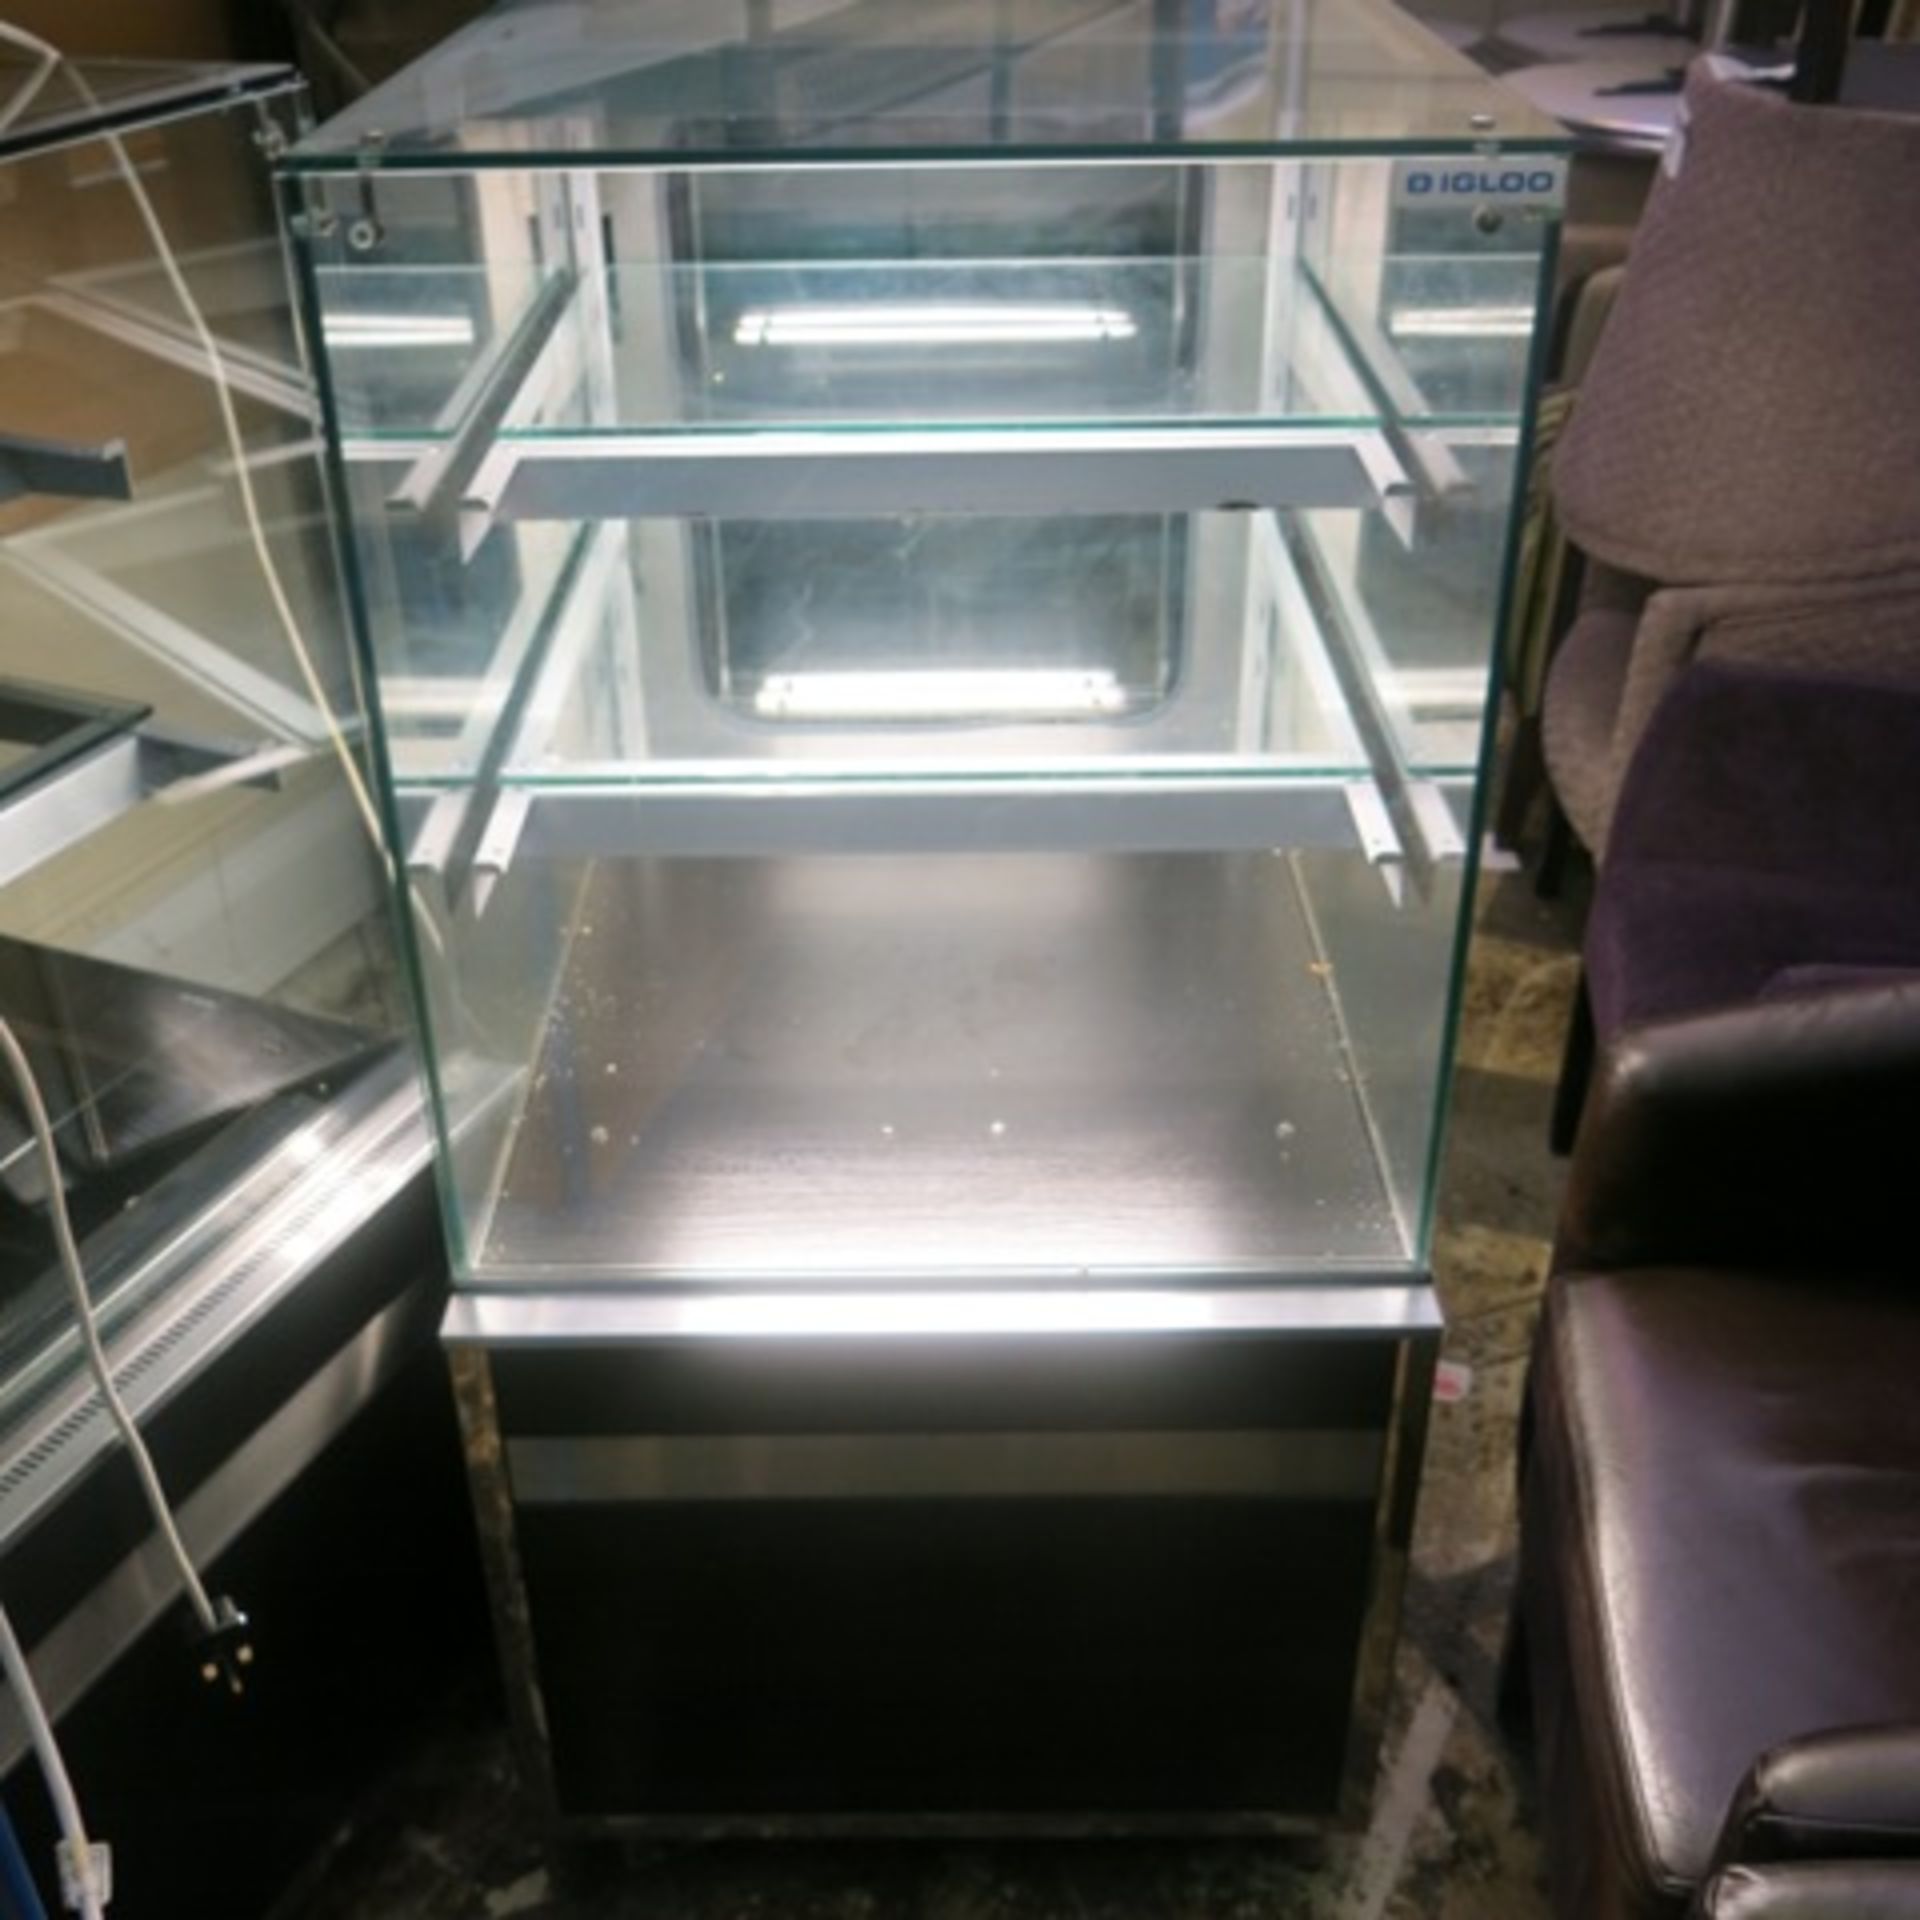 Igloo Refrigerated Glass Display Cabinet with Rear Door & 2 Glass Shelves, Model Gastroline Cube 0. - Image 7 of 7